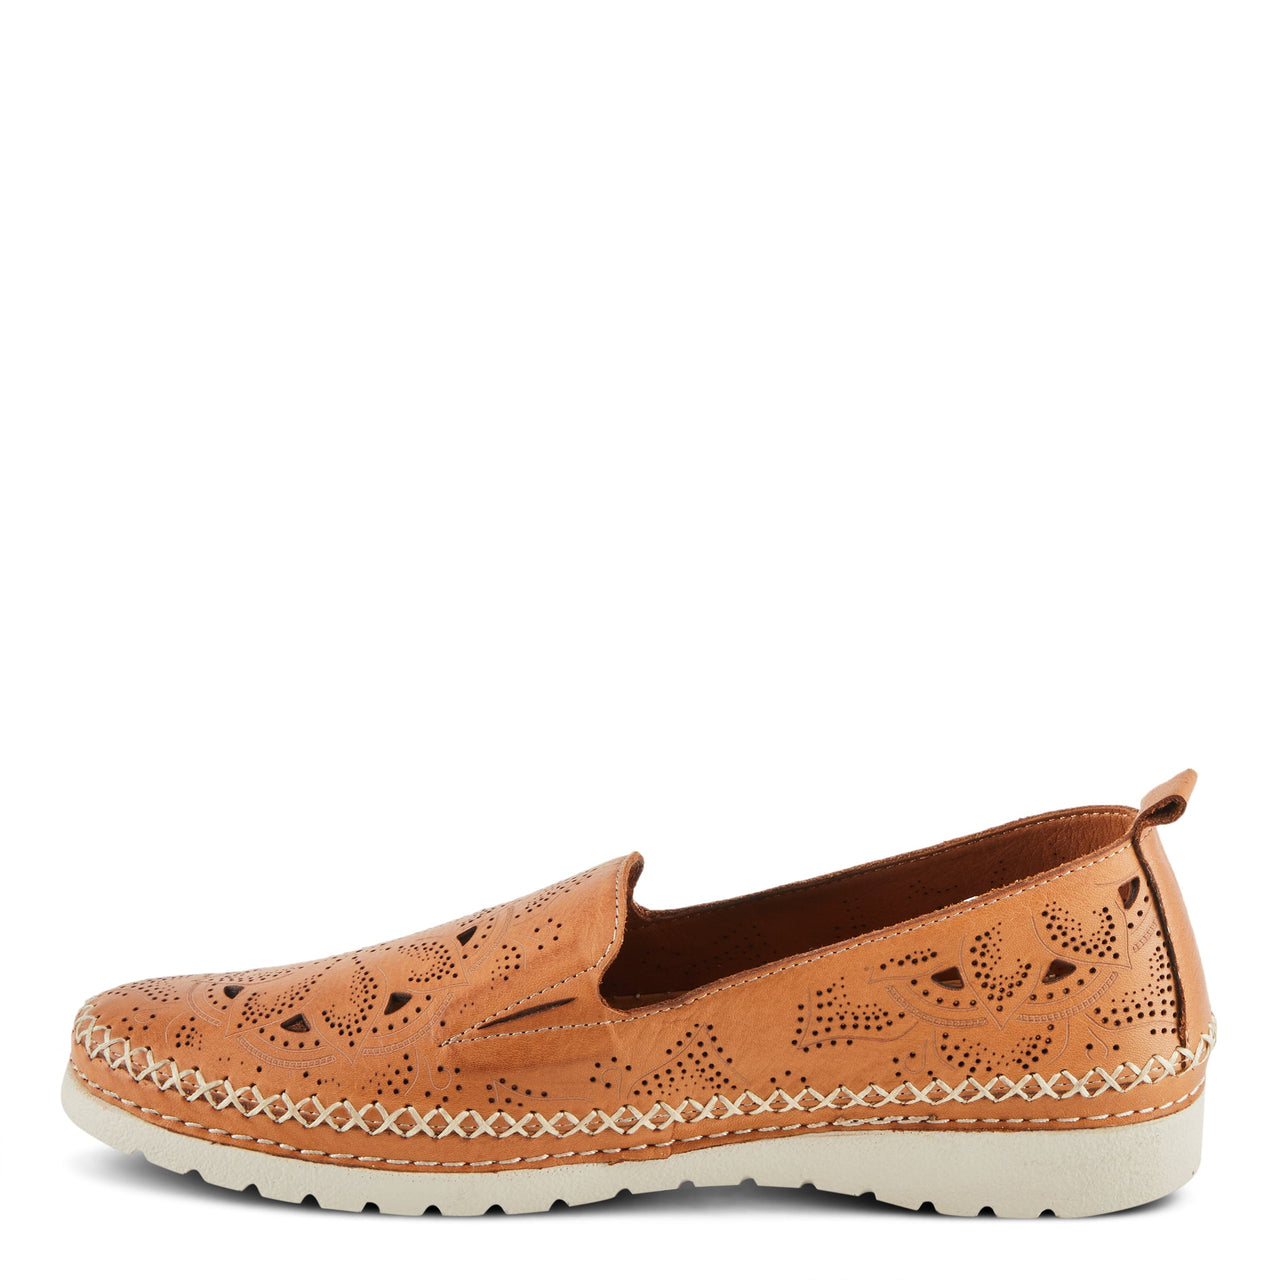 Versatile tan leather shoes with a comfortable block heel